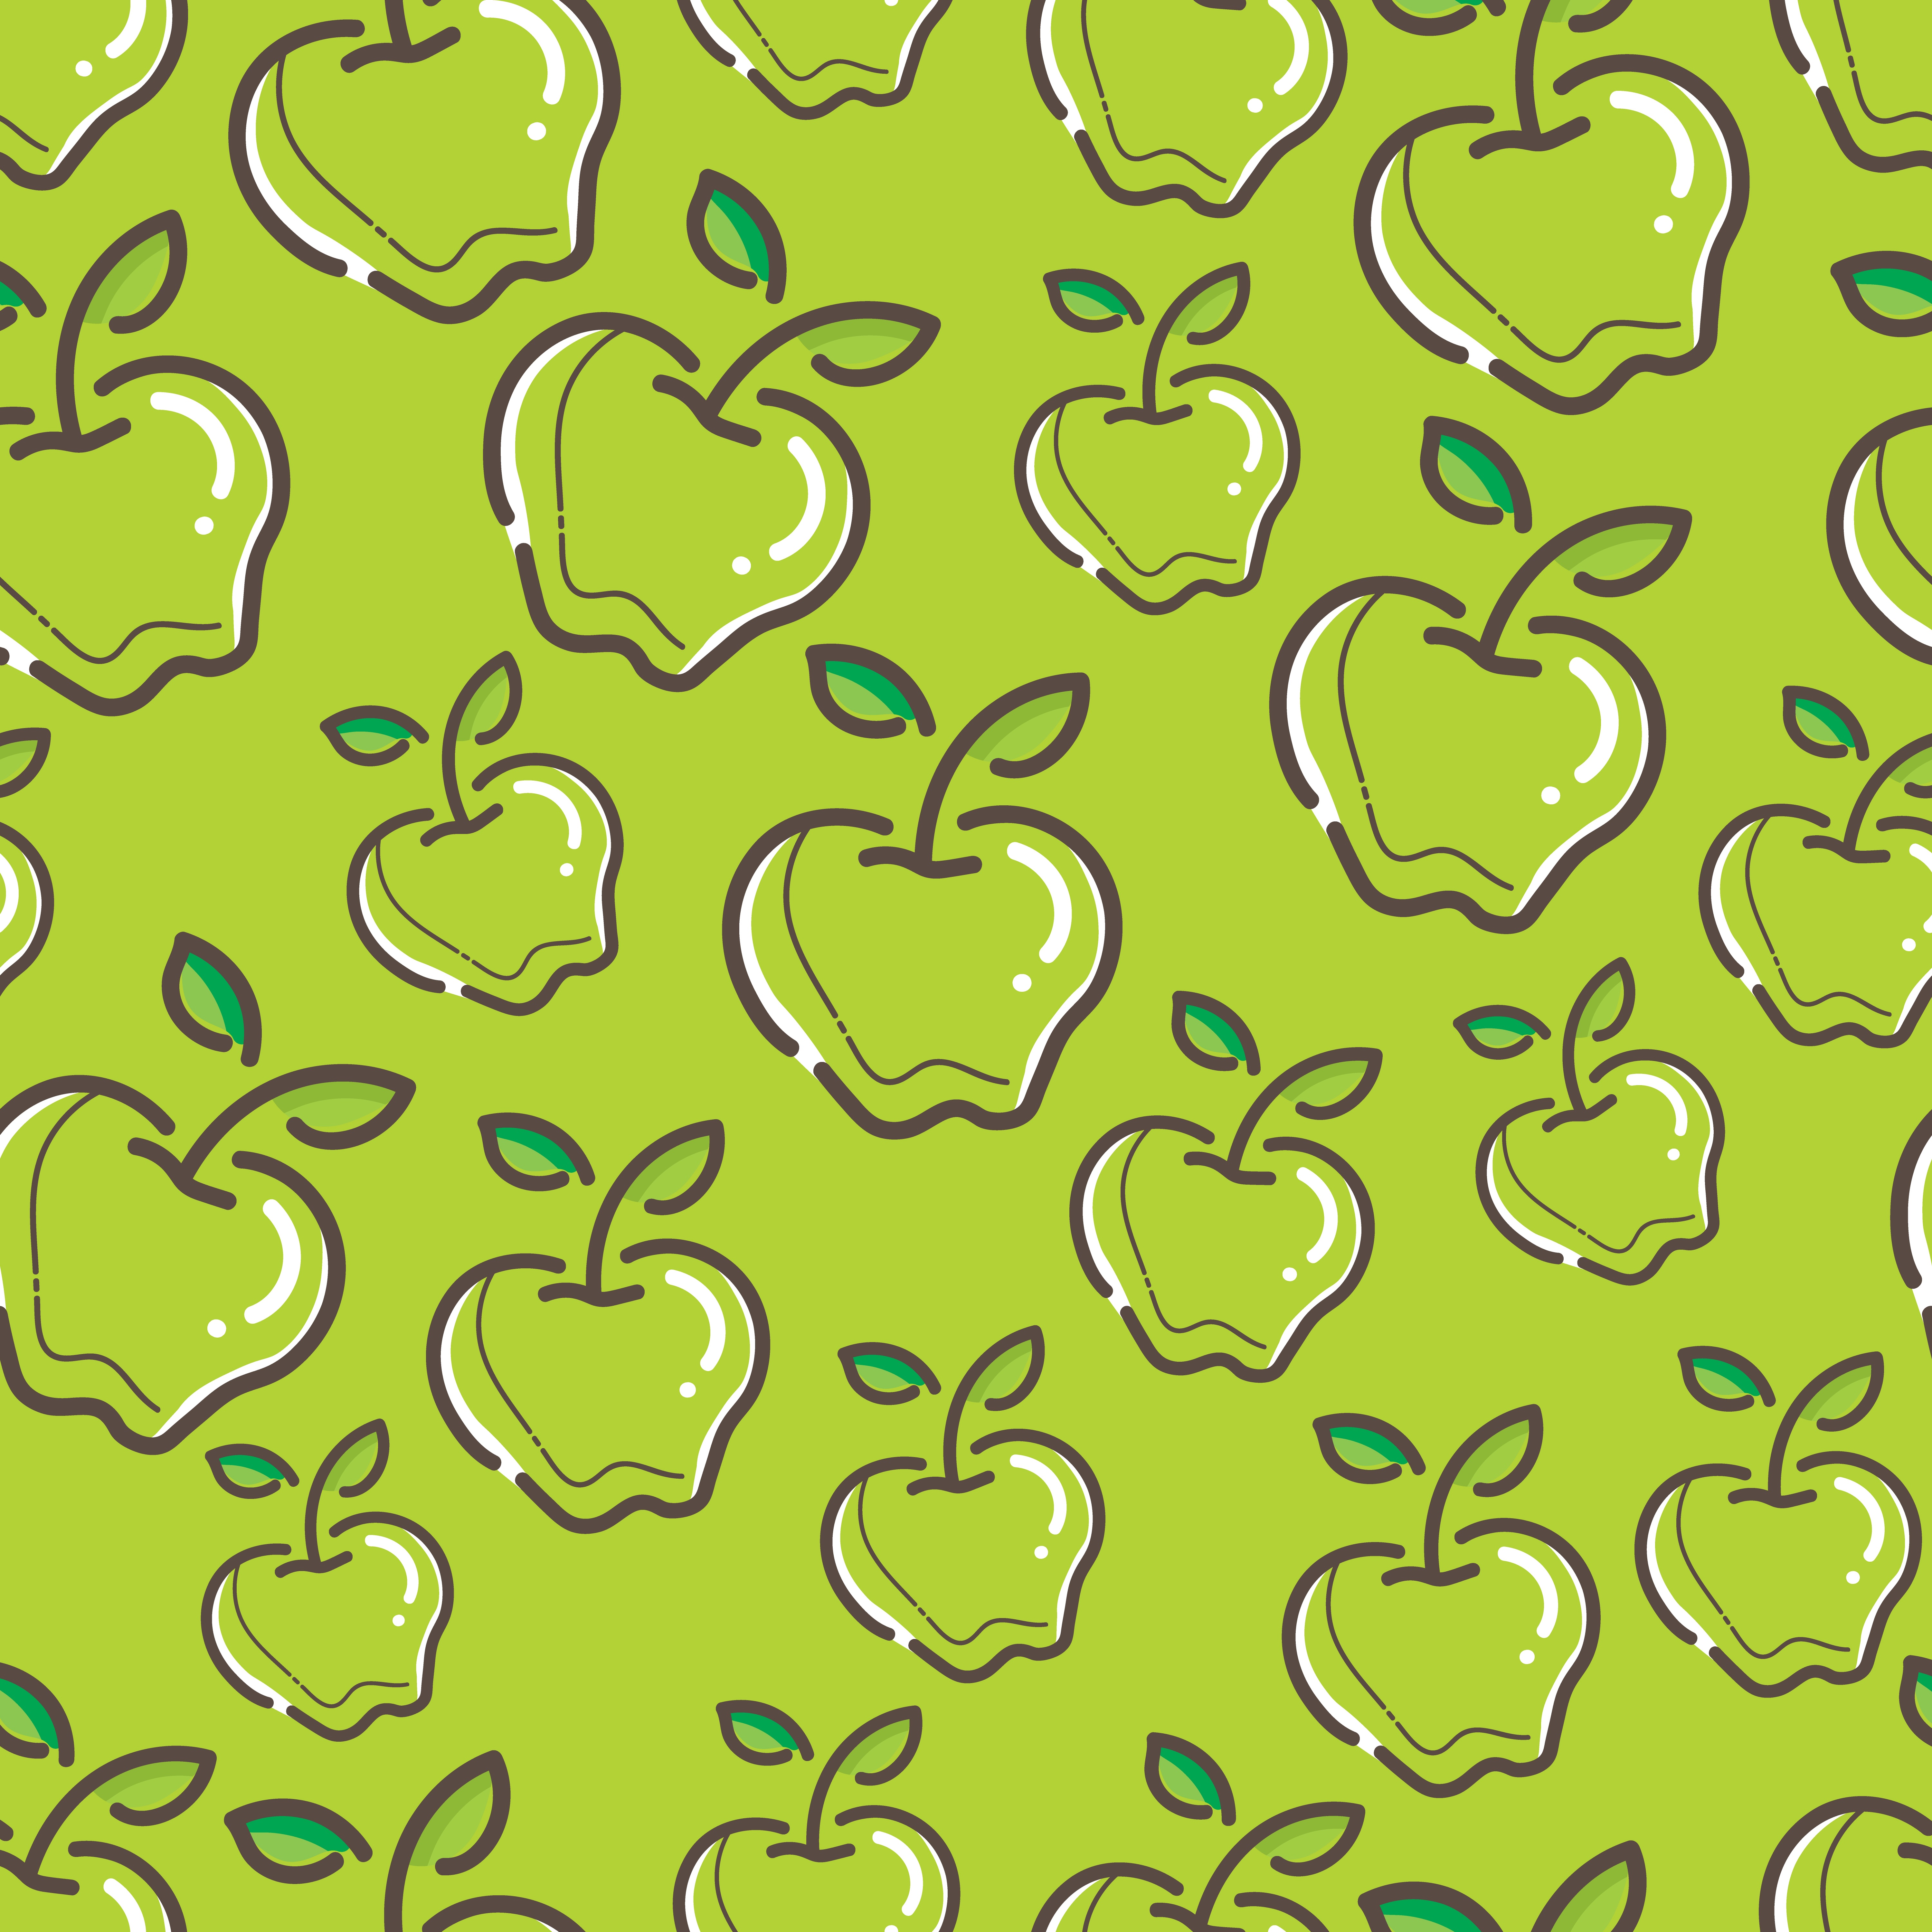 145631 download wallpaper texture, vector, art, apples, patterns, textures screensavers and pictures for free